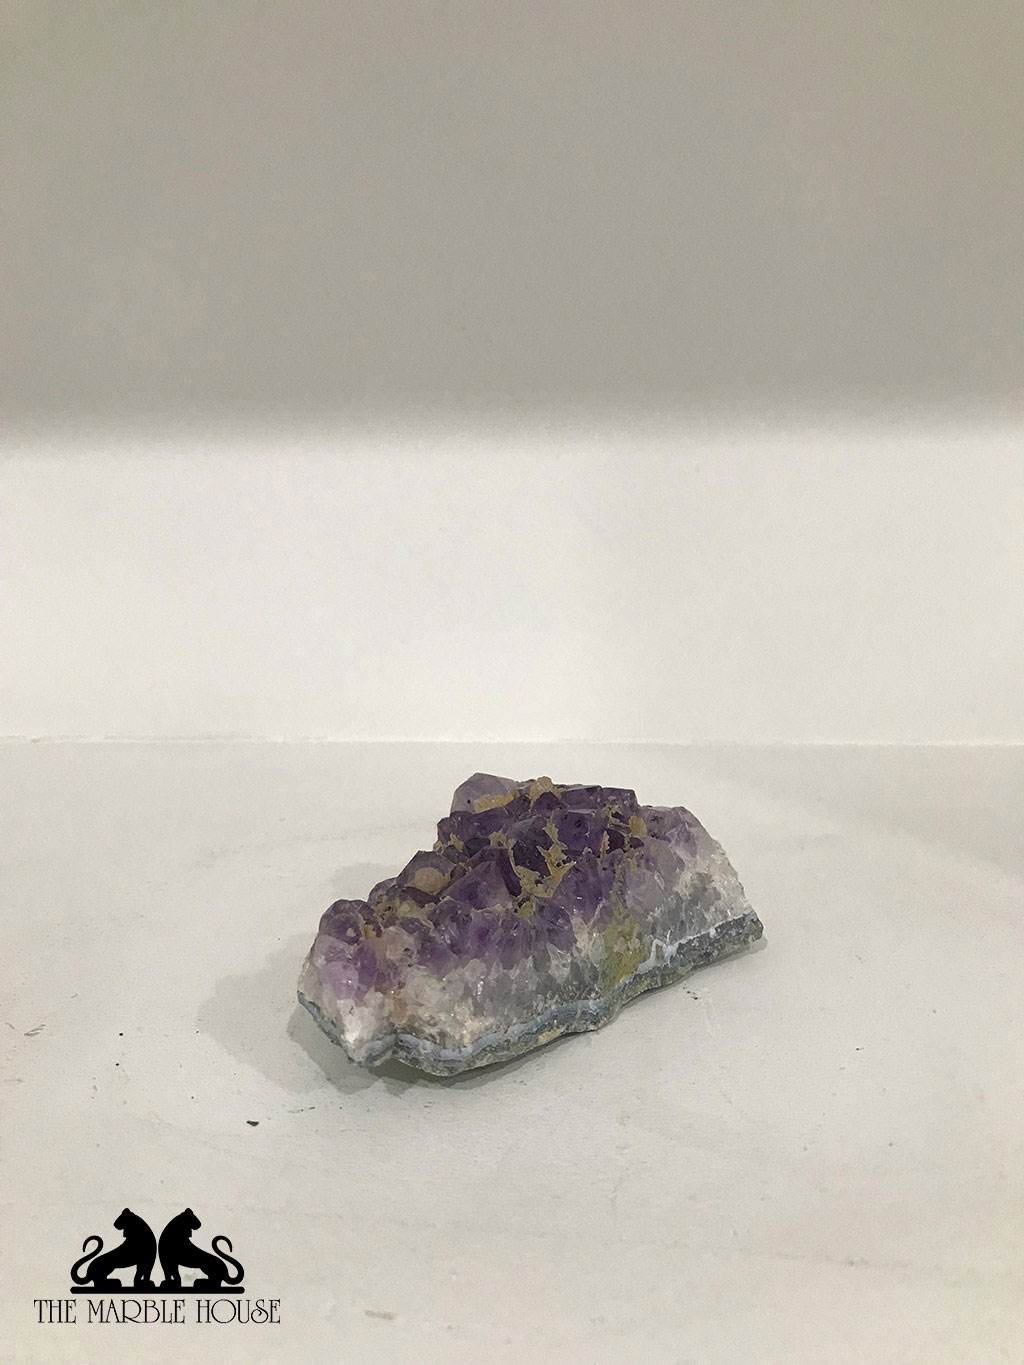 The Marble House. Natural stones for sale. Amethyst stone. Amethysts for sale, Sydney.